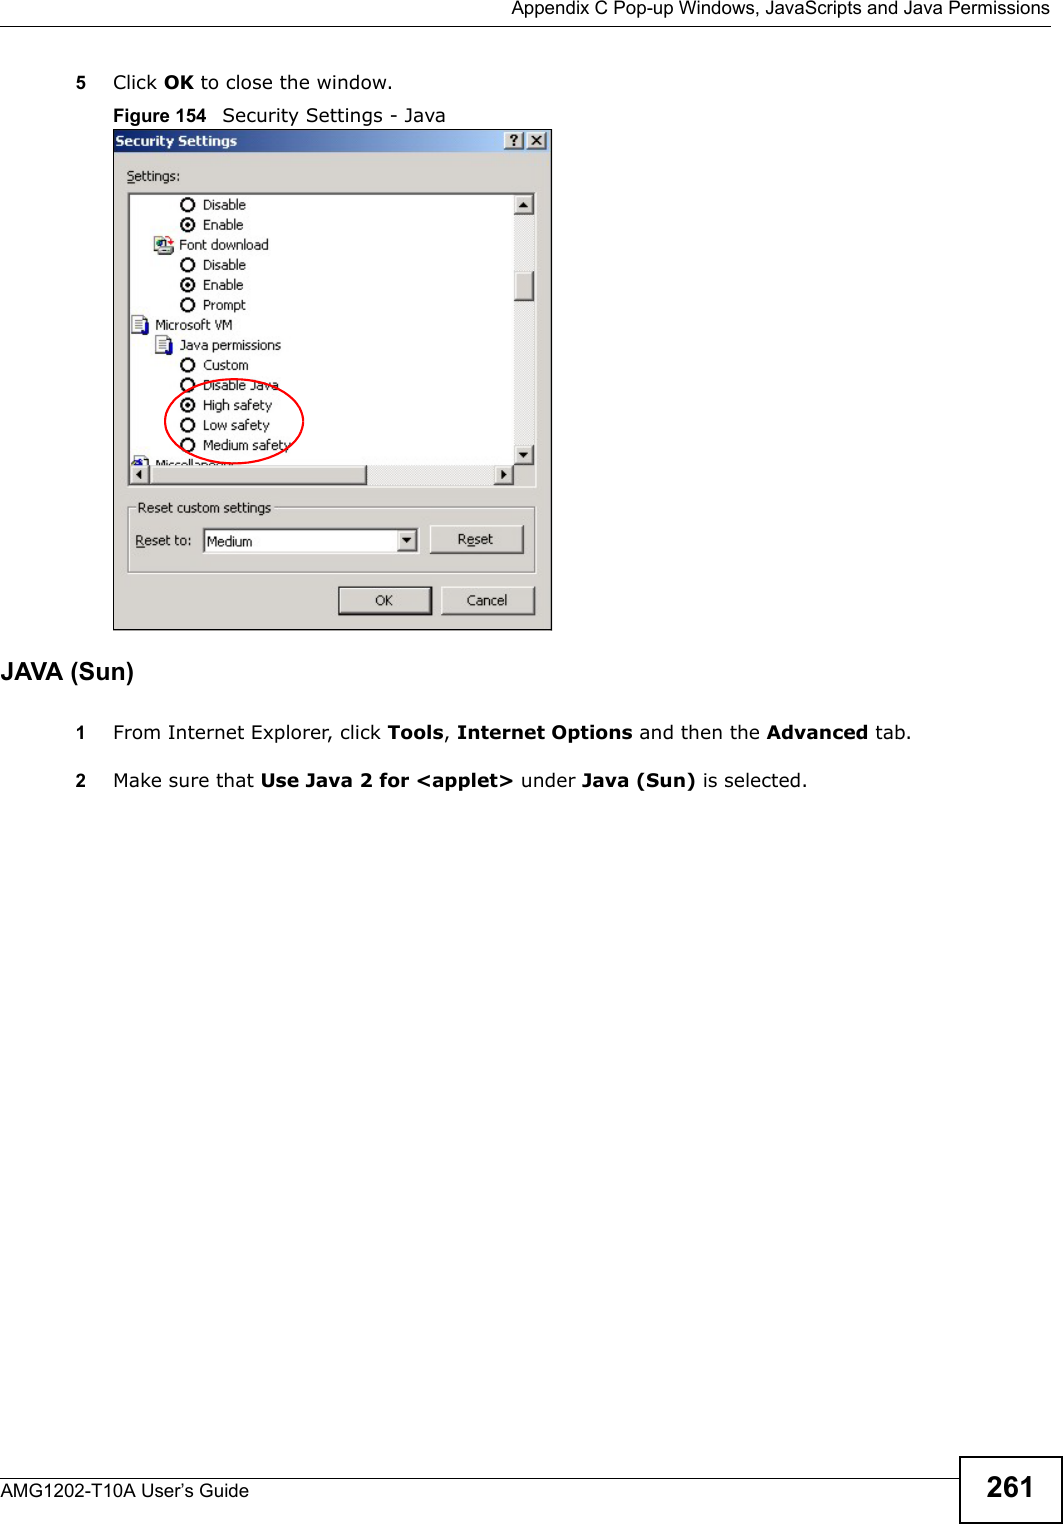  Appendix C Pop-up Windows, JavaScripts and Java PermissionsAMG1202-T10A User’s Guide 2615Click OK to close the window.Figure 154   Security Settings - Java JAVA (Sun)1From Internet Explorer, click Tools, Internet Options and then the Advanced tab. 2Make sure that Use Java 2 for &lt;applet&gt; under Java (Sun) is selected.